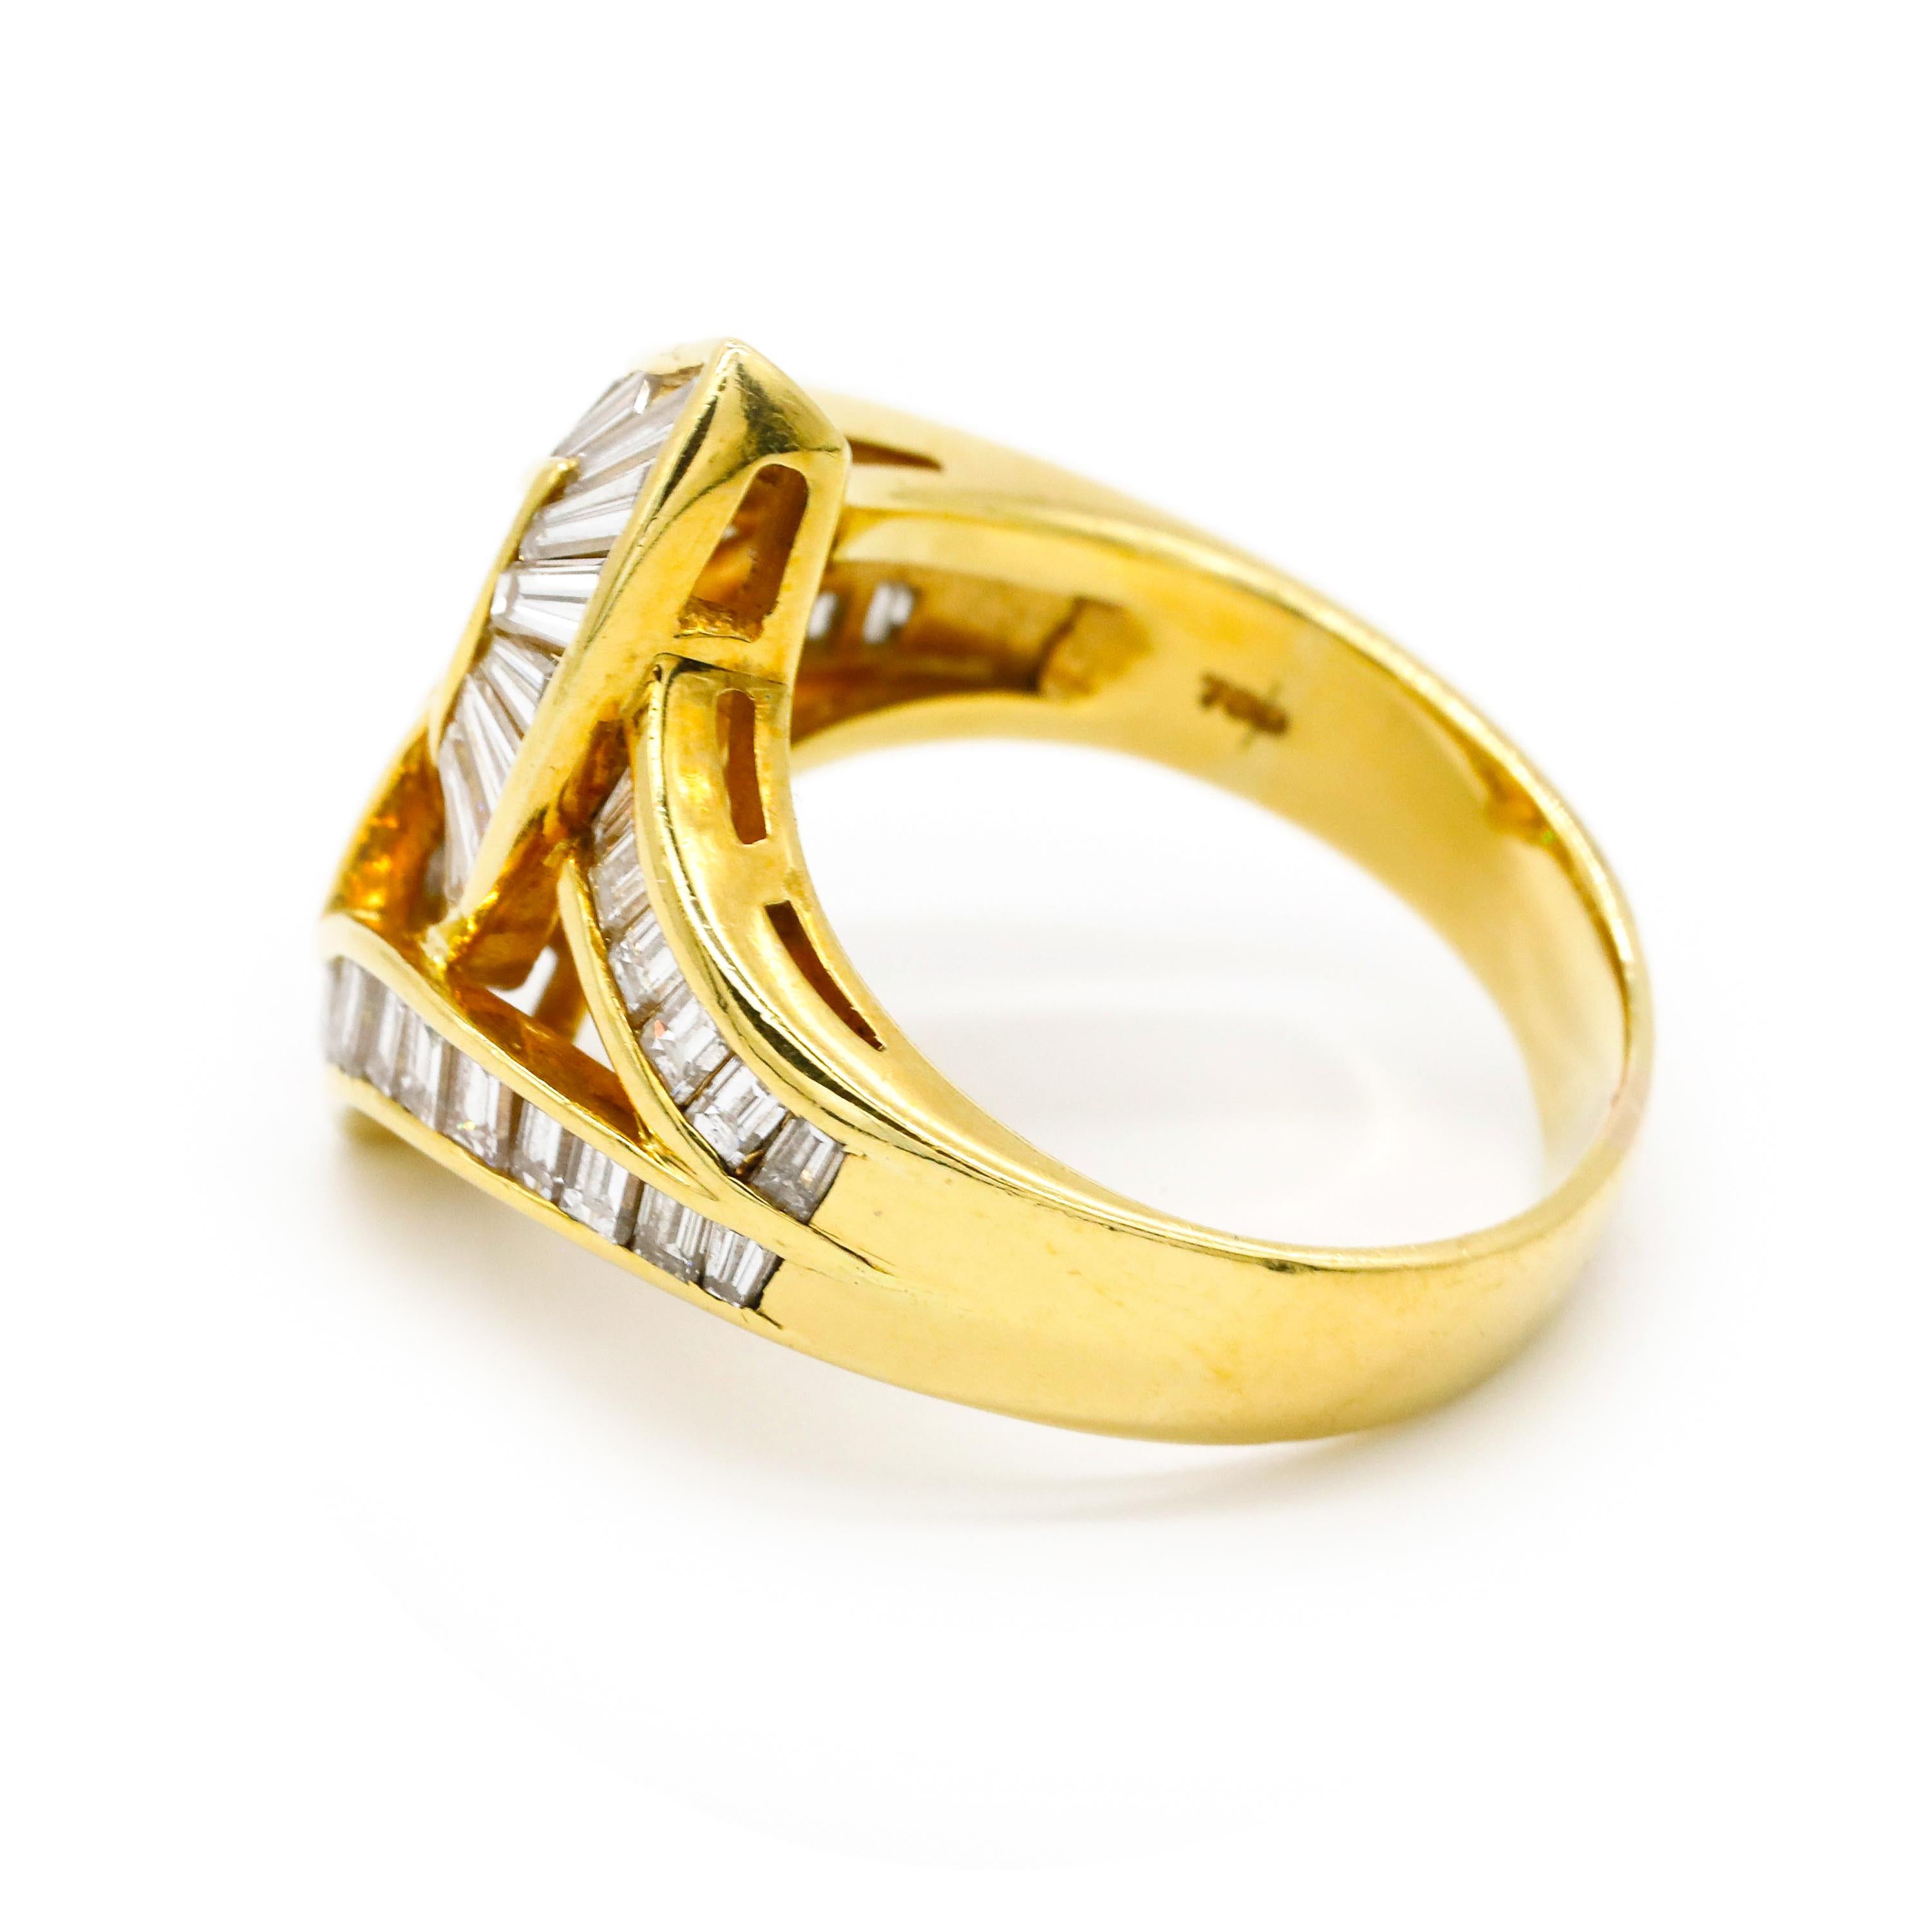 2.20 TCW Baguette Cut Diamond Fine Estate Engagement Ring 18k Yellow Gold

She will be just overwhelmed with emotions when she sees this estate ring. 2.20 TCW Baguette cut Diamond ring, embraced by a frame of baguette-shaped white diamonds, creating